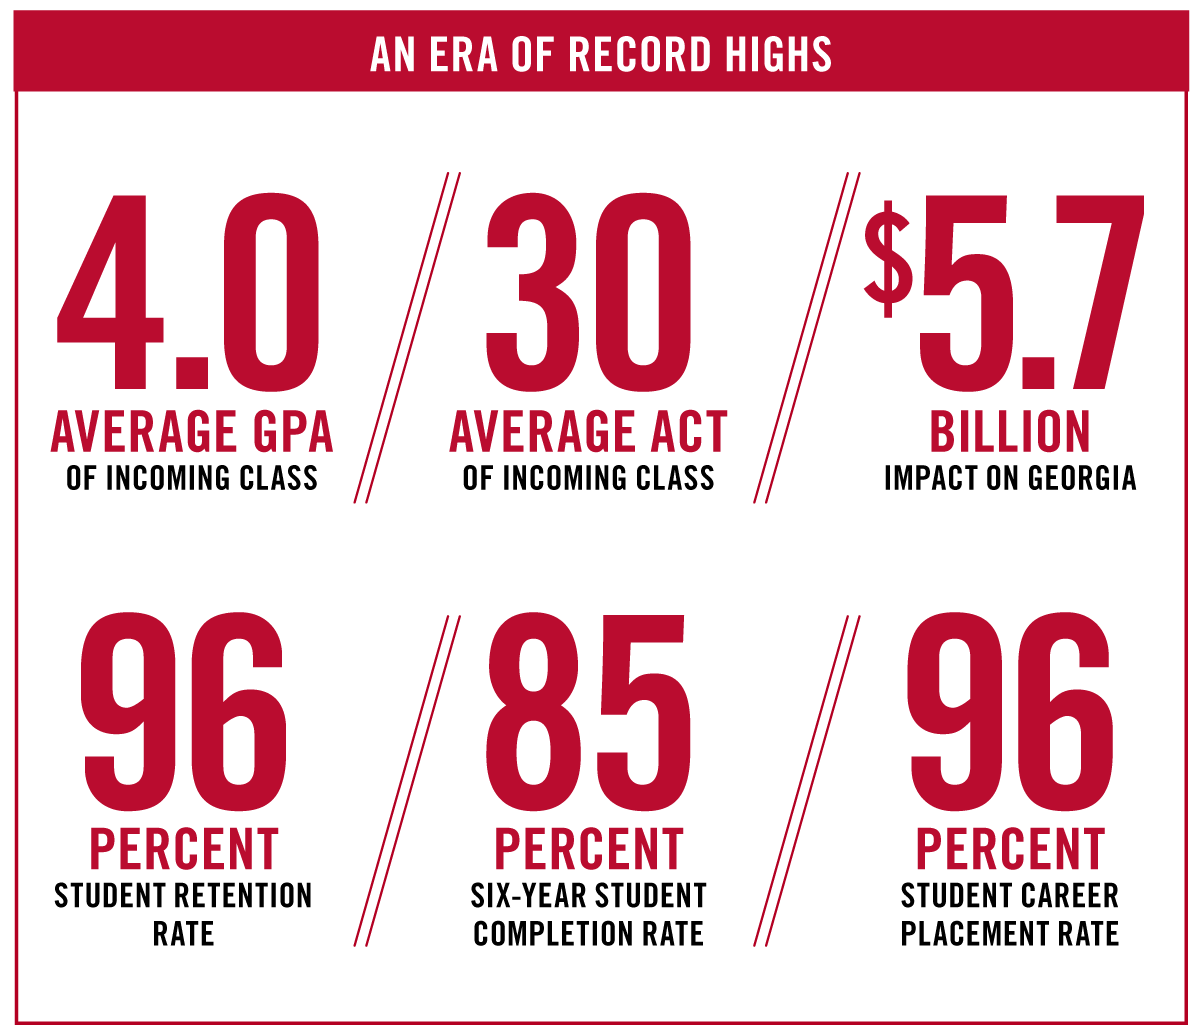 An era of record highs infographic